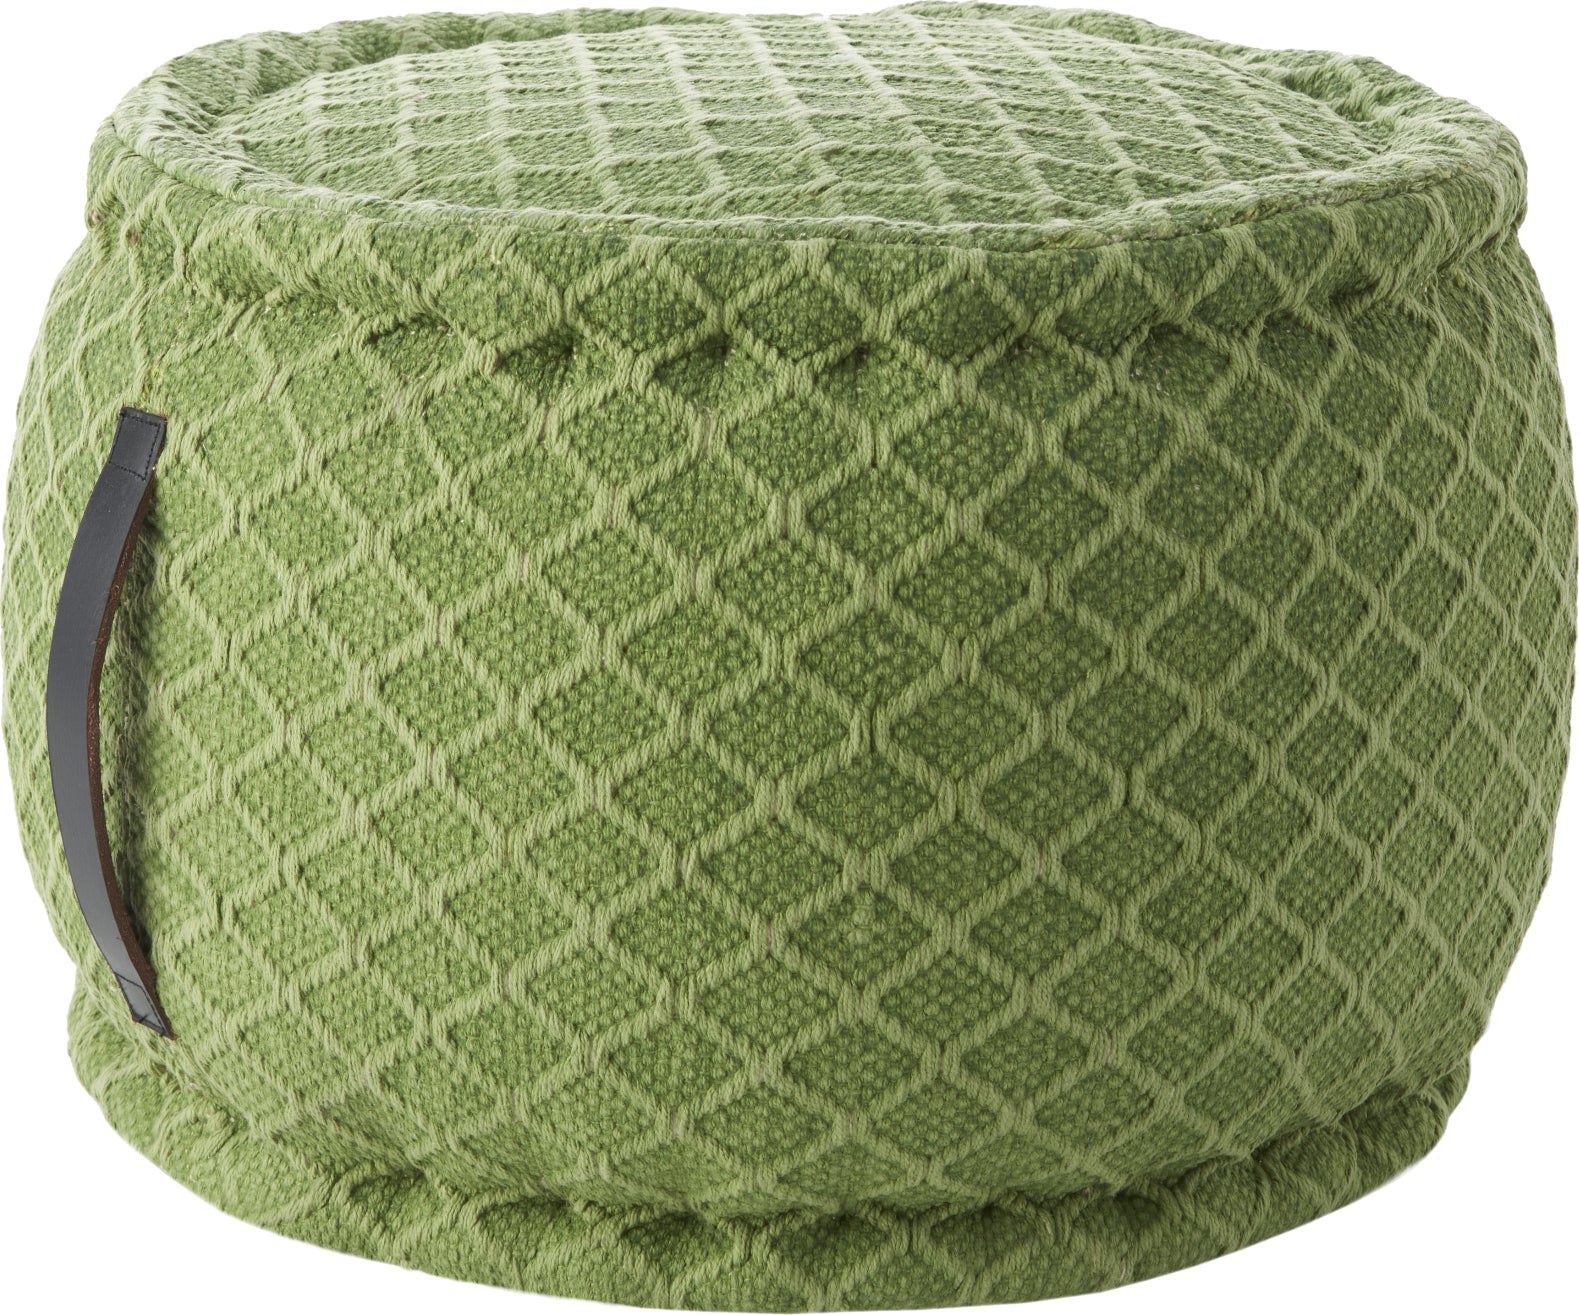 Nourison Outdoor Pillows Woven Lattice Pouf Green by Mina Victory main image